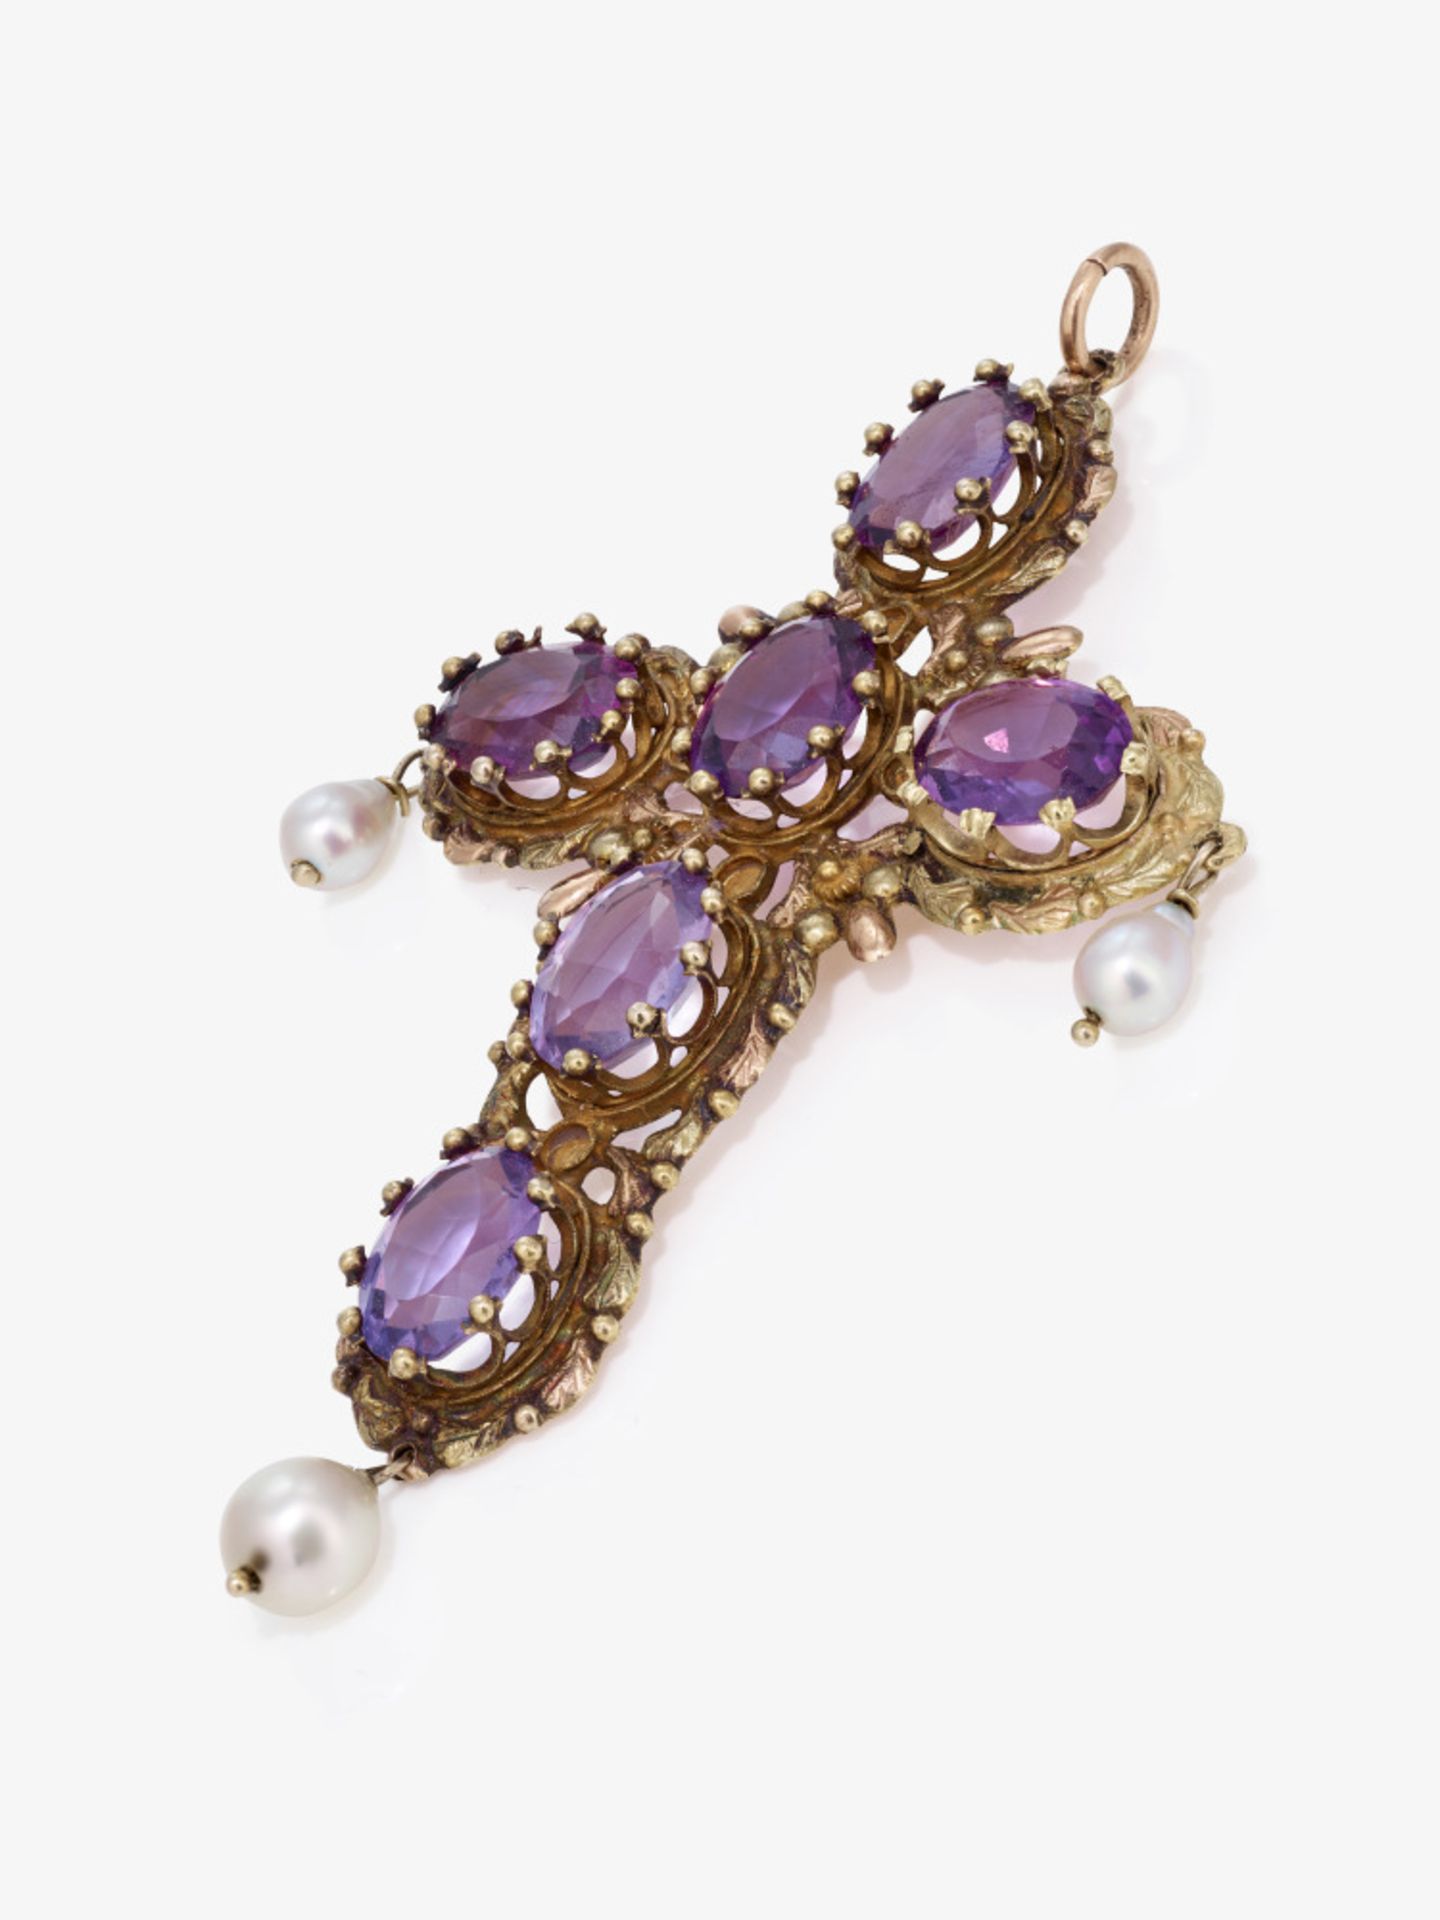 A cross pendant with amethysts and cultured pearls - Probably Germany or Austria, circa 1840 - Image 2 of 2